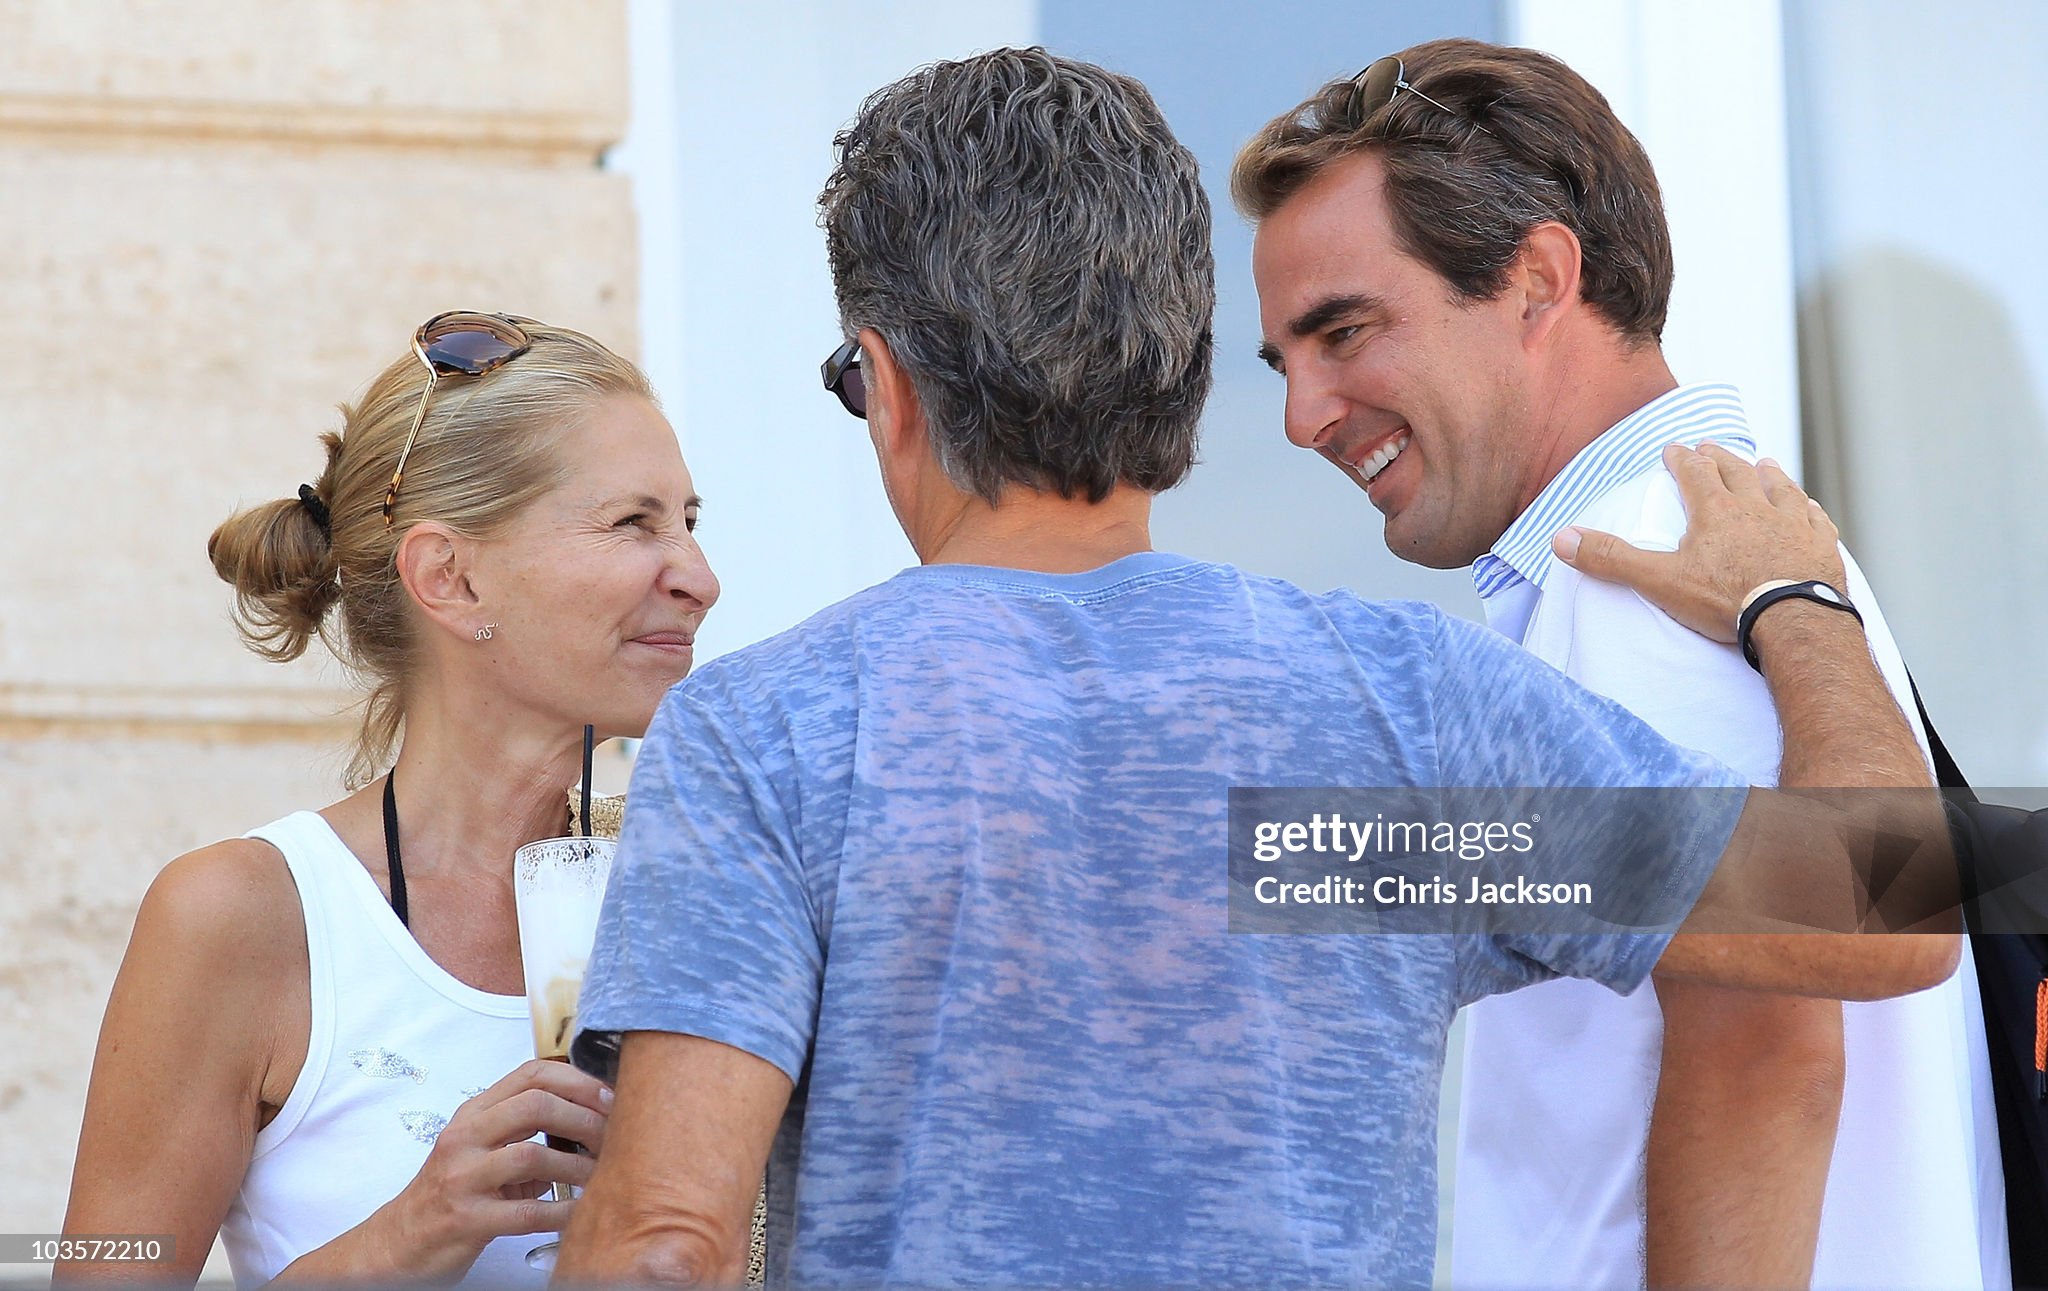 prince-nikolaos-of-greece-chats-to-his-future-father-in-law-atilio-brillembourg-as-his-future.jpg